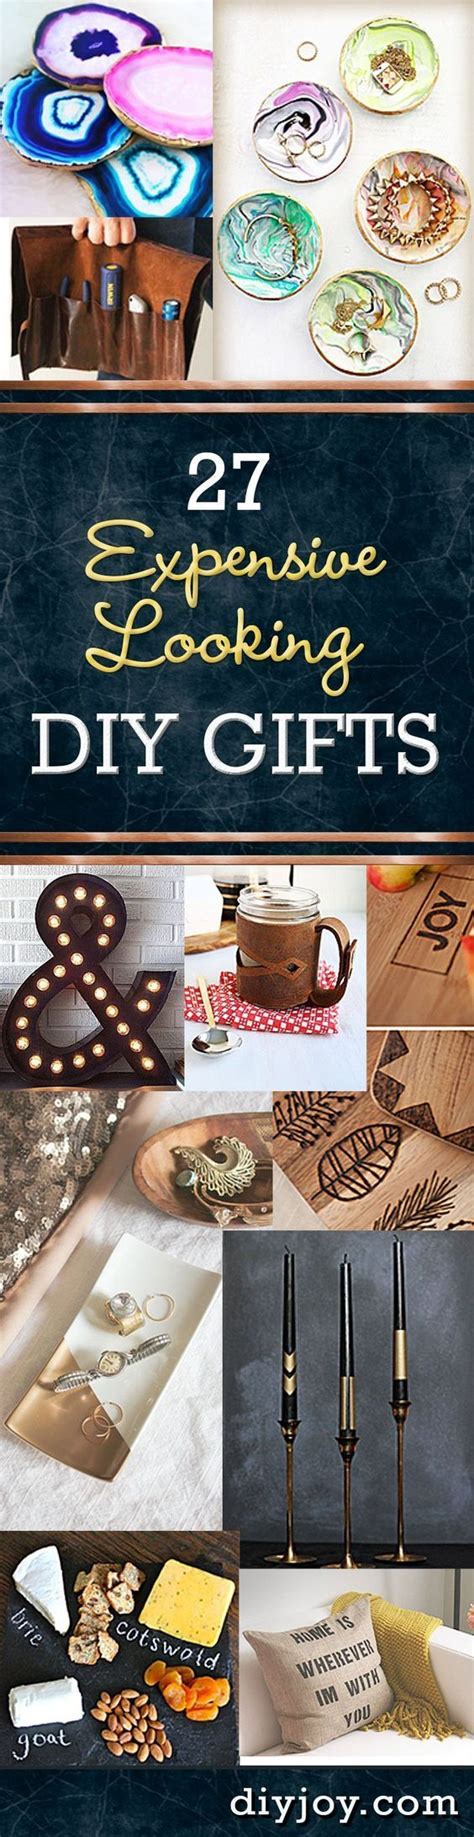 Diy skills training for women. 27 Expensive Looking Inexpensive DIY Gifts | Creative, Christmas gift ideas and For women